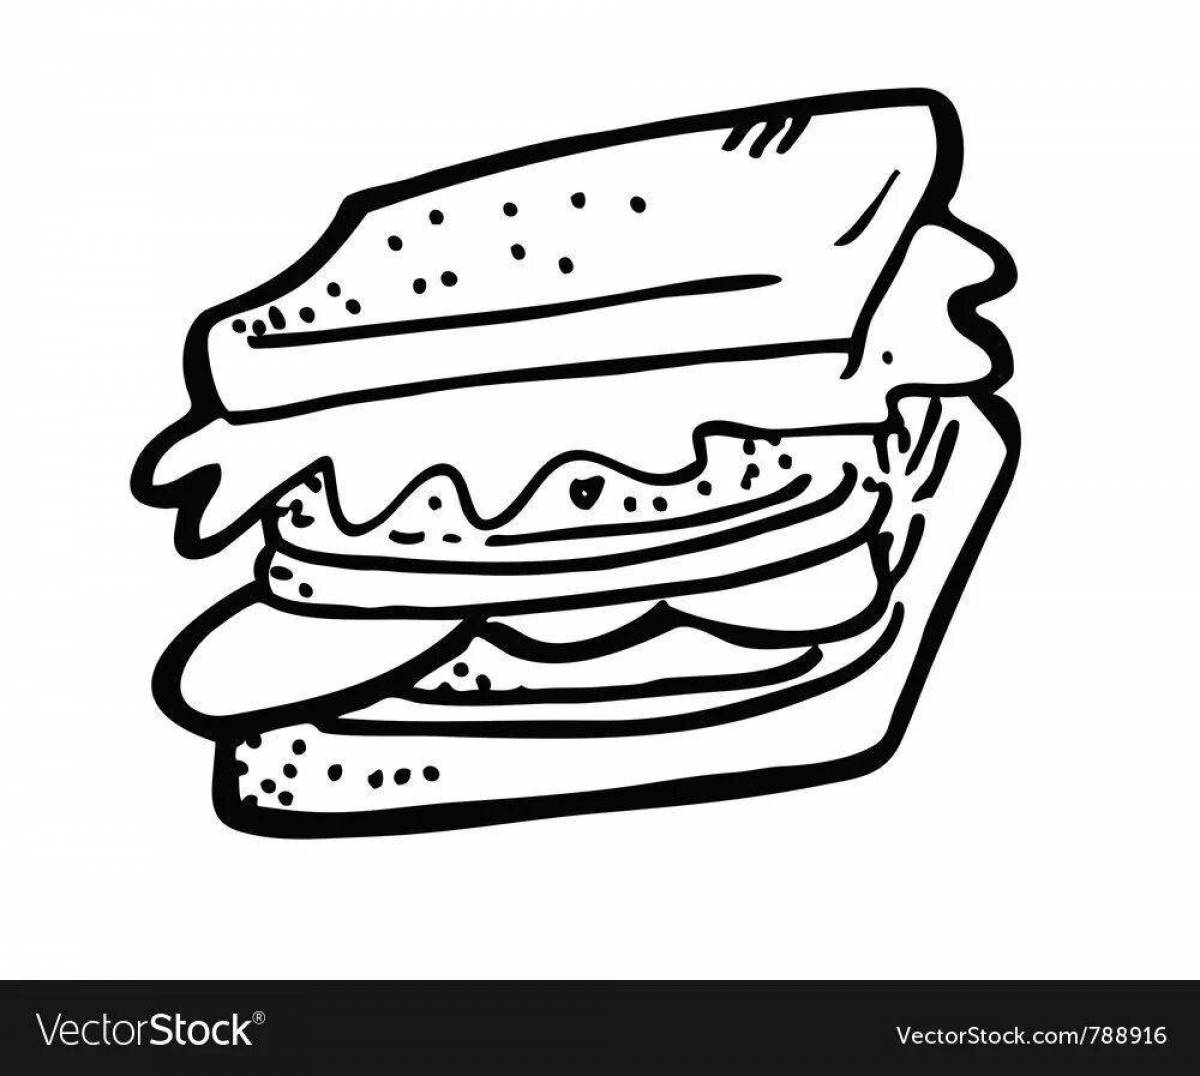 Whimsical sandwich coloring for kids